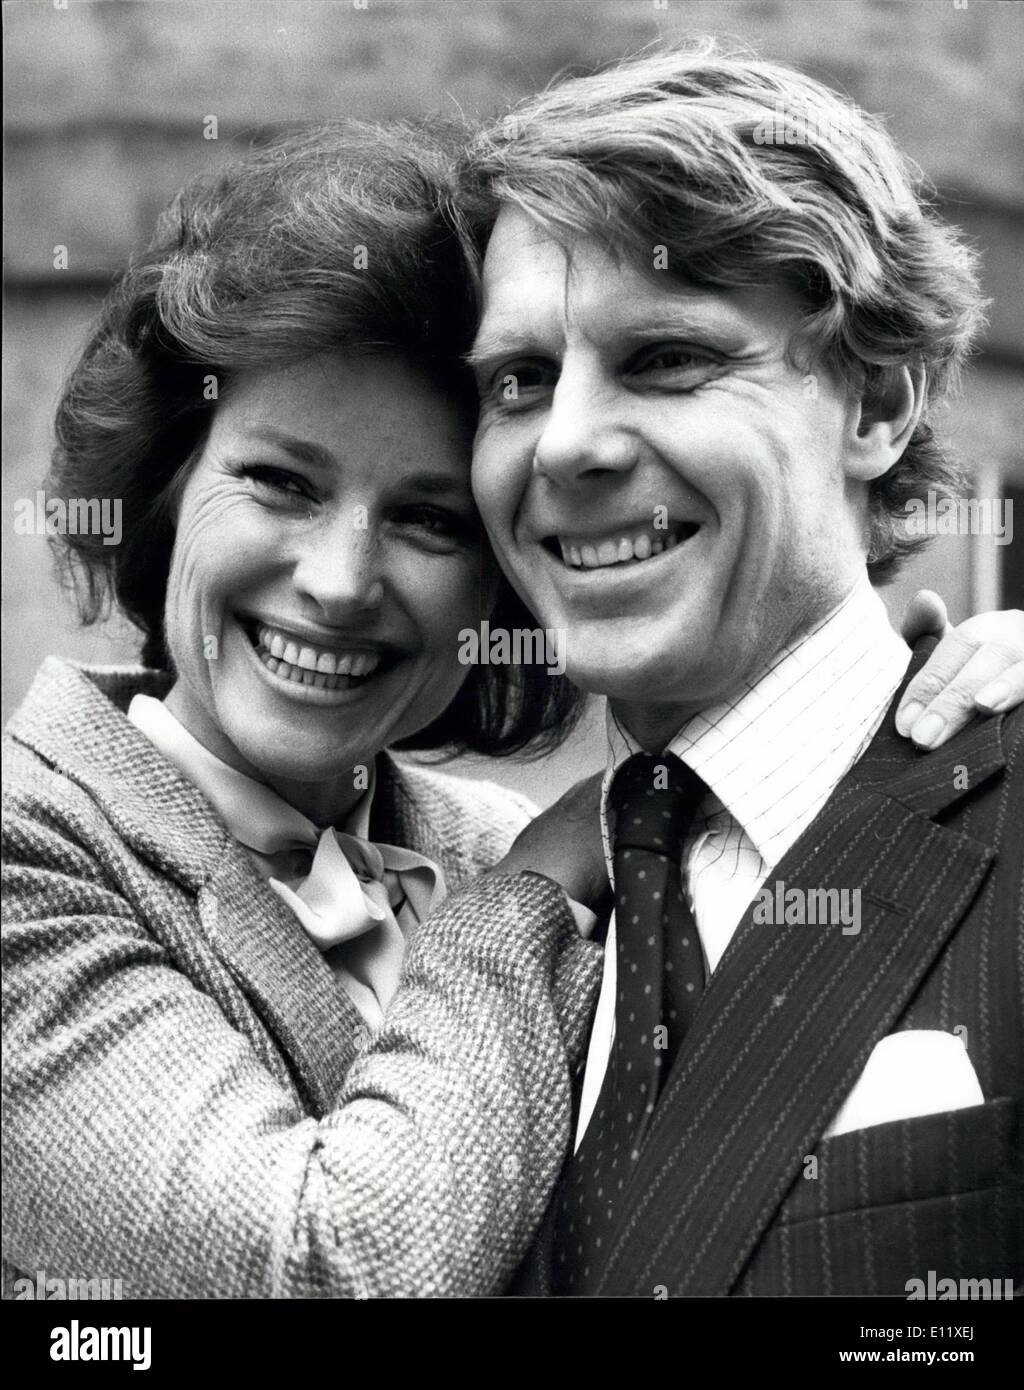 Feb. 02, 1981 - LISA HARROW AND JAMES FOX IN ''NANCY ASTOR'' Lisa Harrow and James Fox are to star in 'Nancy Astor', a major nine-part drama series by Derek Marlowe which tells the life story of the American Women who became Britain's first women member of Parliament. It begins in Virginia, U.S.A. in the post Civil War period and moves from the 'Gilded Age' of New York society to Edwardian England, ending shortly after the second World War. Lisa Harrow plays Nancy Astor and James Fox plays her husband, Waldorf Astor. PHOTO SHOWS Lisa Harrow and James Fox pictured in London today Stock Photo